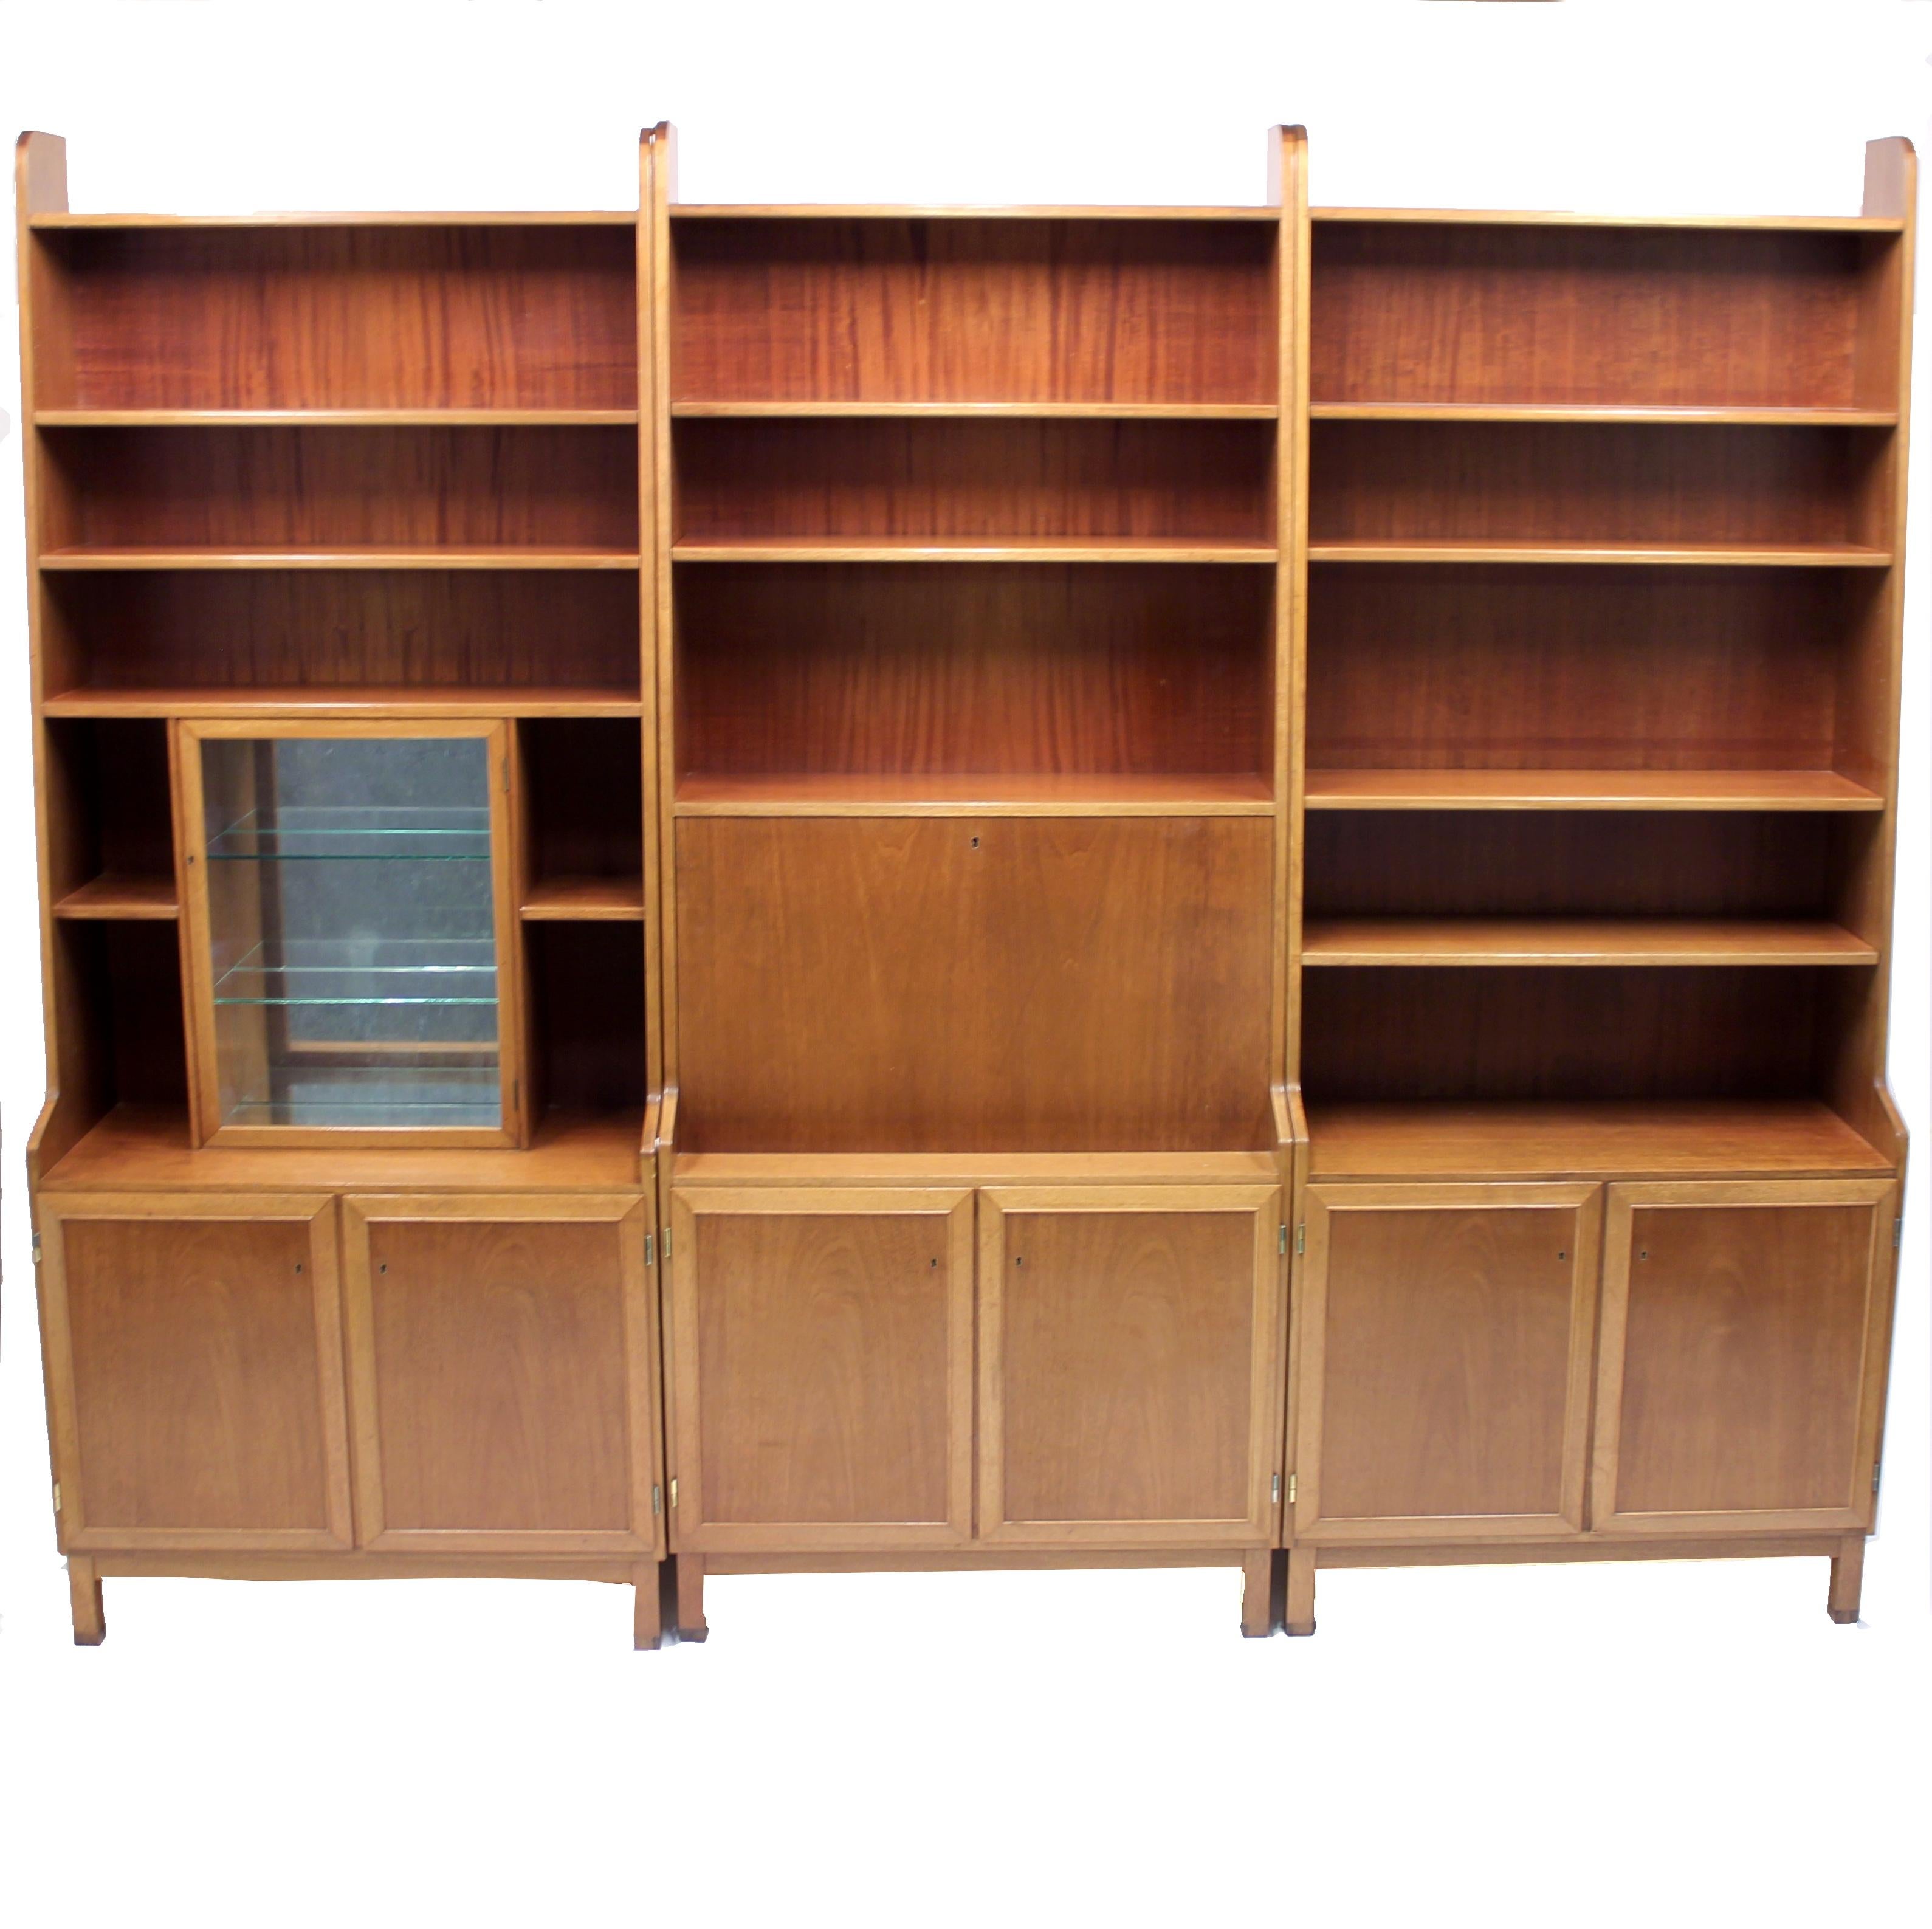 3-piece teak and mahogany handmade bookshelf by unknown Scandinavian master cabinet maker. Most likely a special order due to the very high level of craftsmanship and attention to details. It's also are a bit higher than the norm measuring 220 cm in